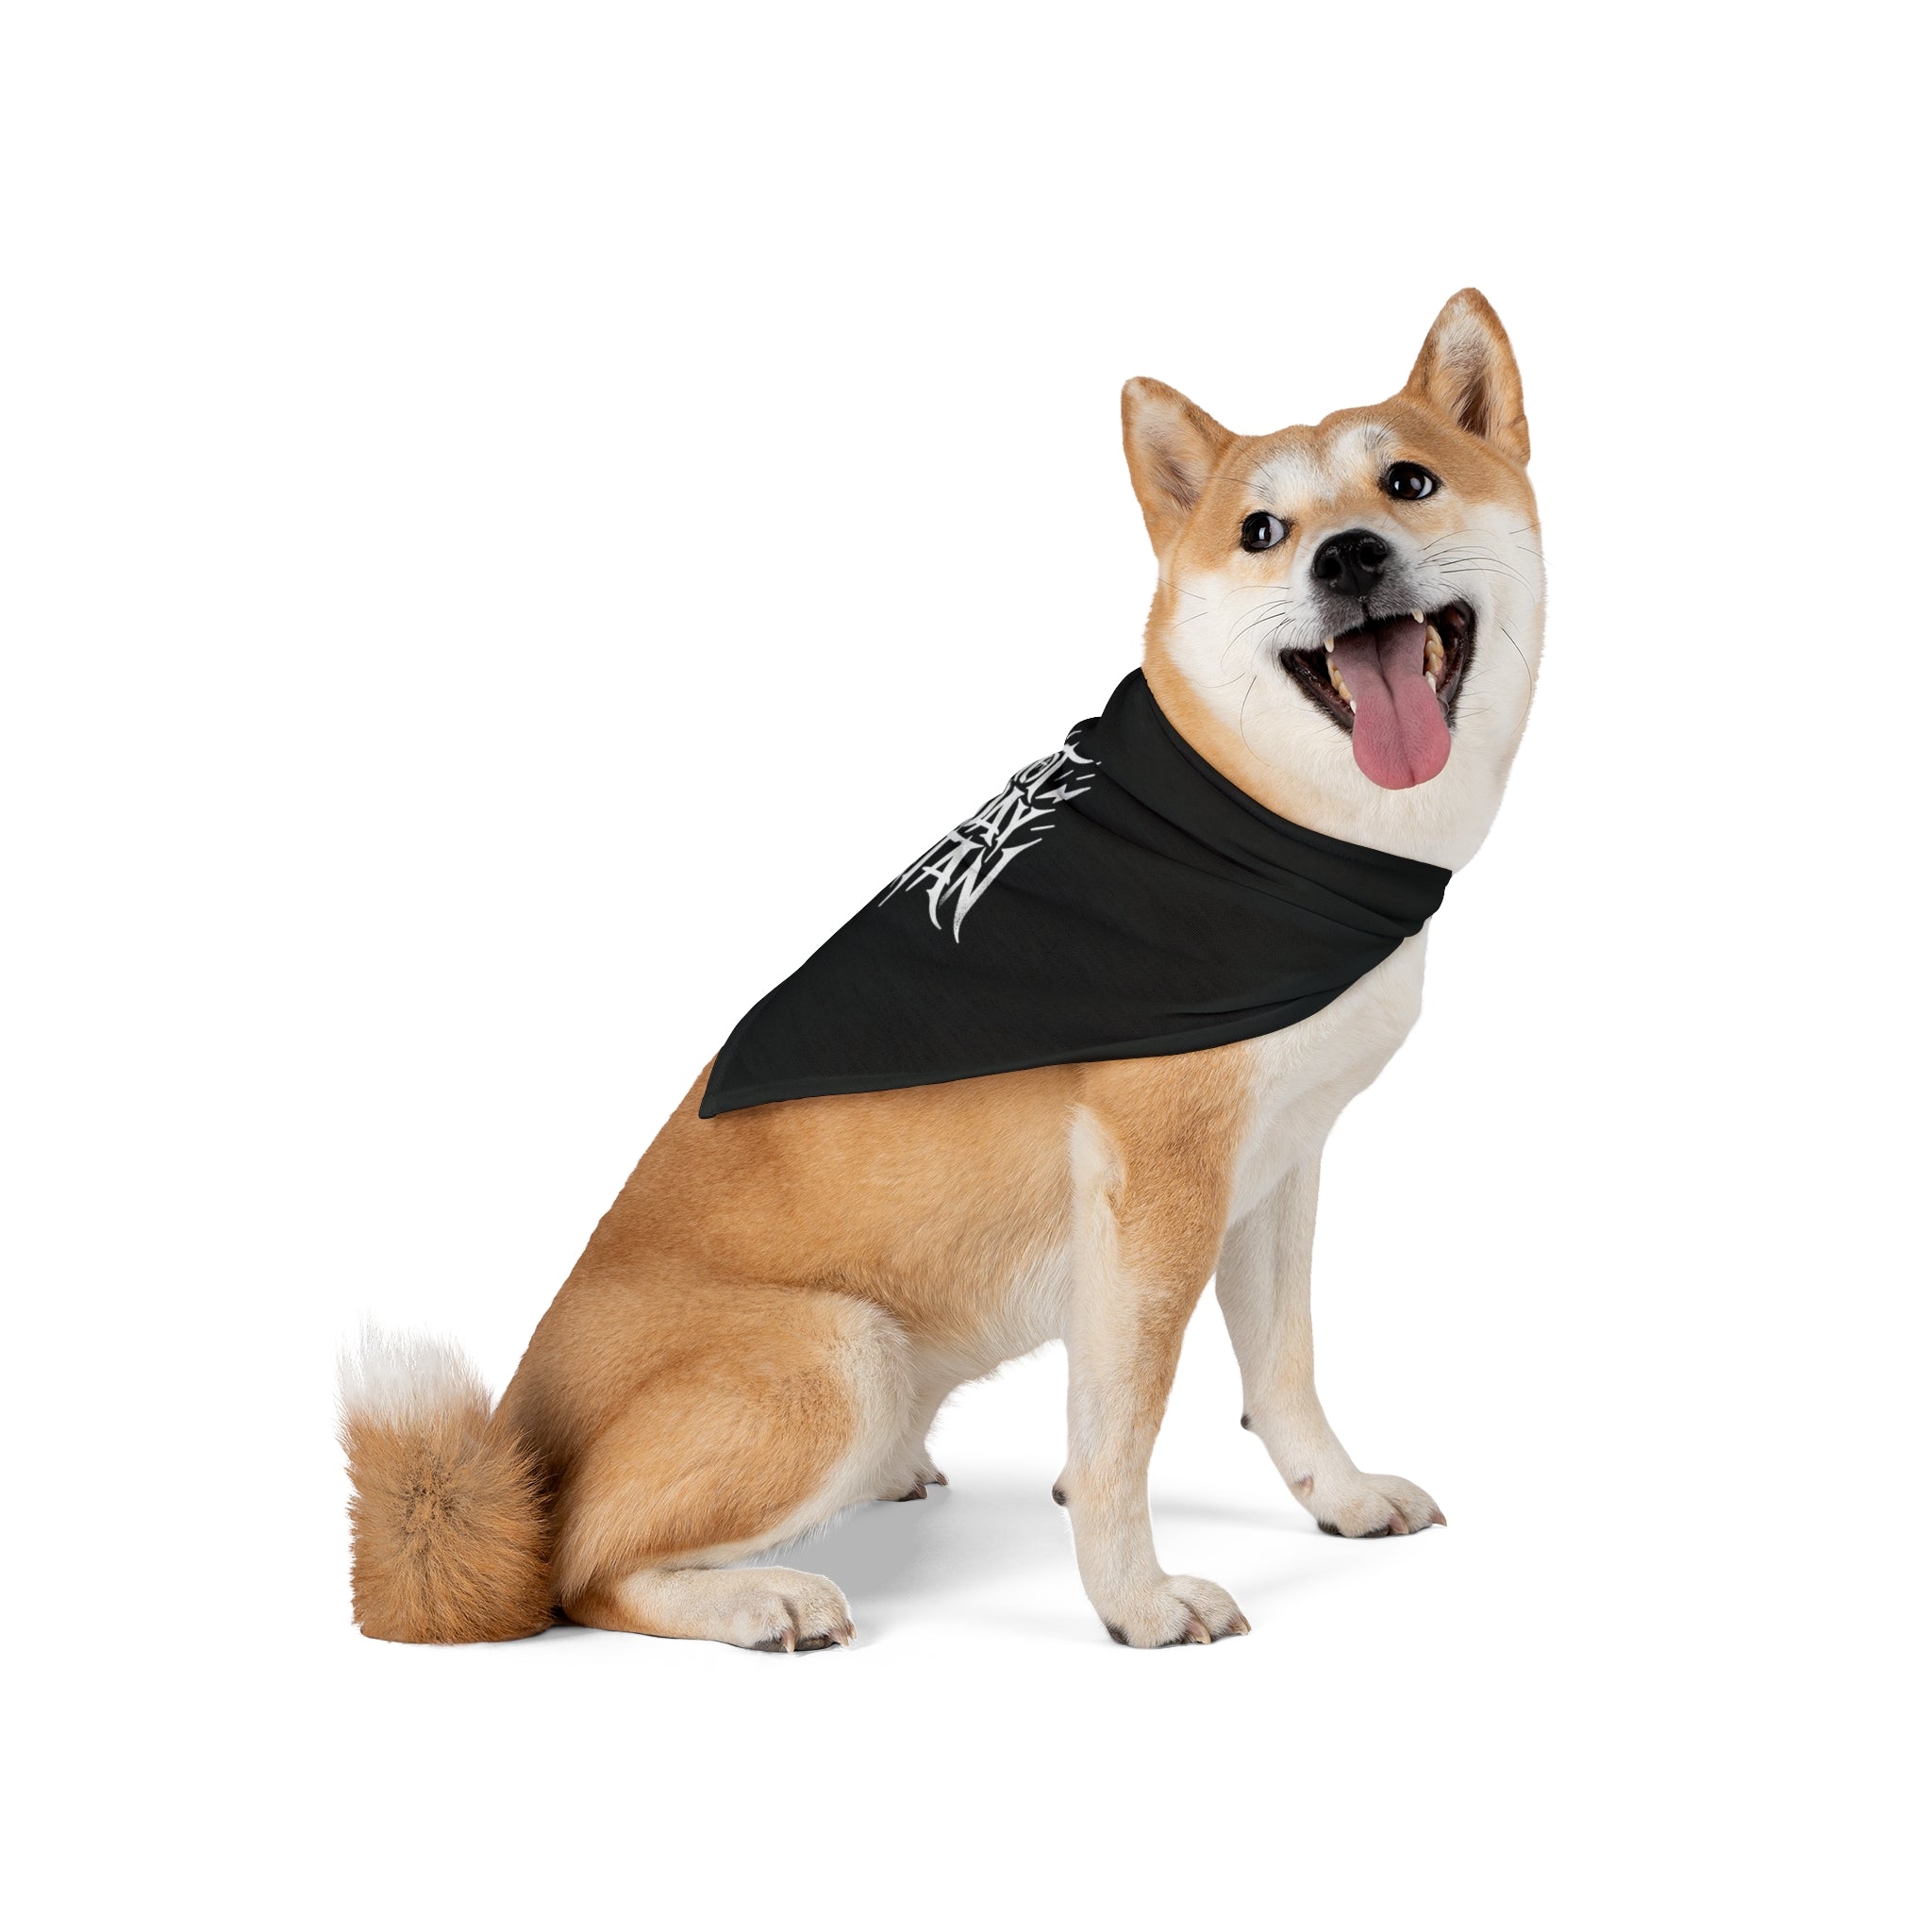 A Shiba Inu dog sits on a white background, wearing a "Not Today Satan - Pet Bandana." The dog has its mouth open and tongue out, appearing happy.